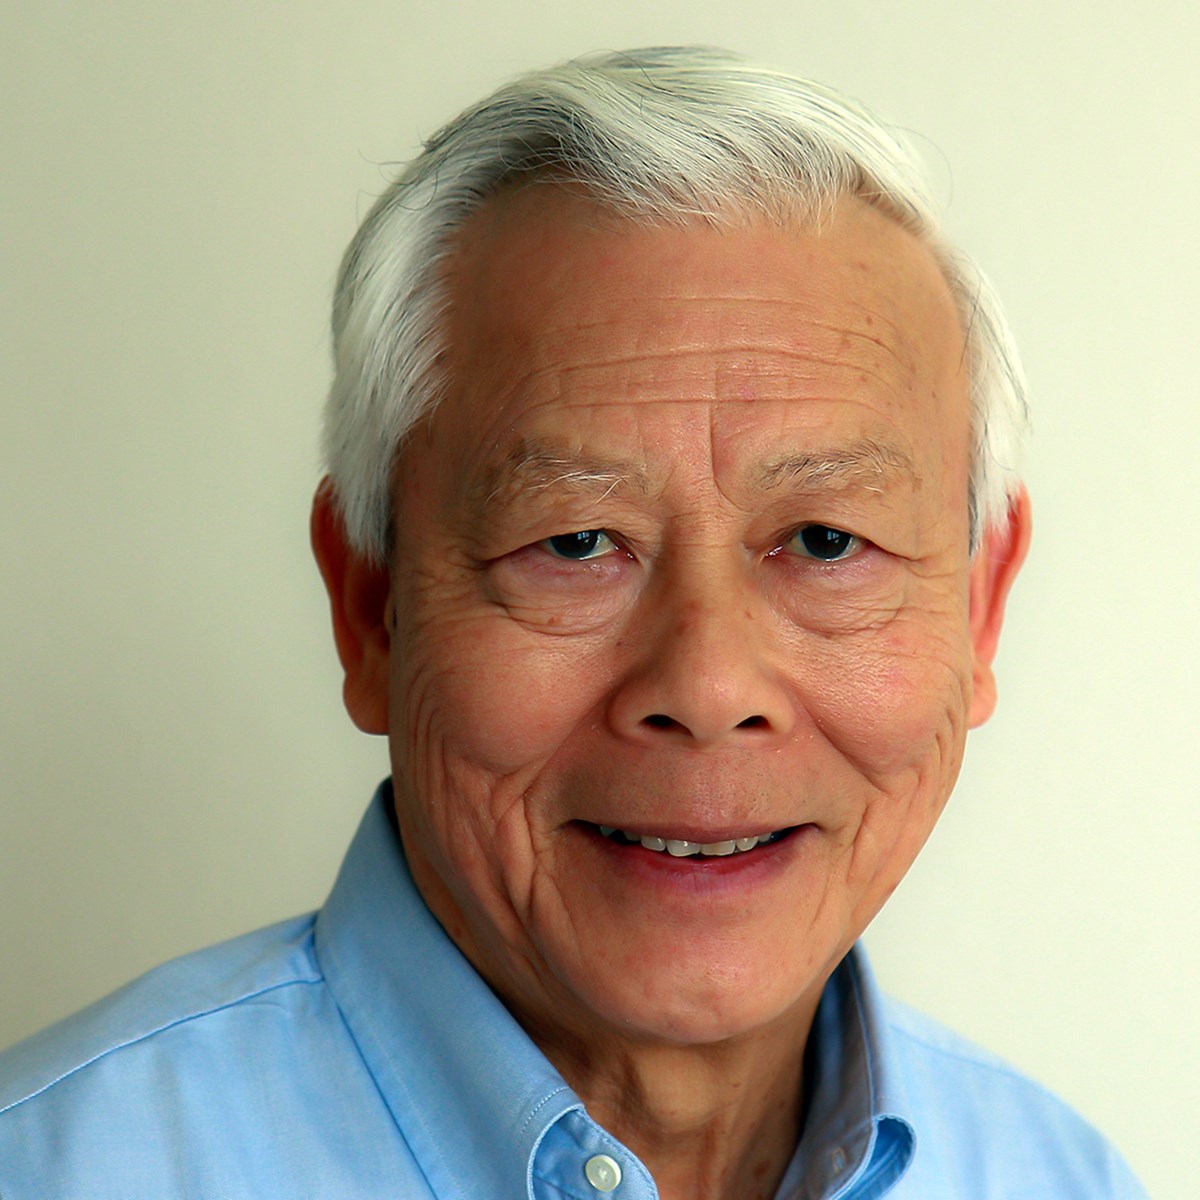 Hai B. Pho, Ph.D., is Professor Emeritus of Political Science, University of Massachusetts Lowell. Pho specializes in Southeast Asian politics, Vietnamese history and civilization, international relations, US foreign policy and refugee policy.